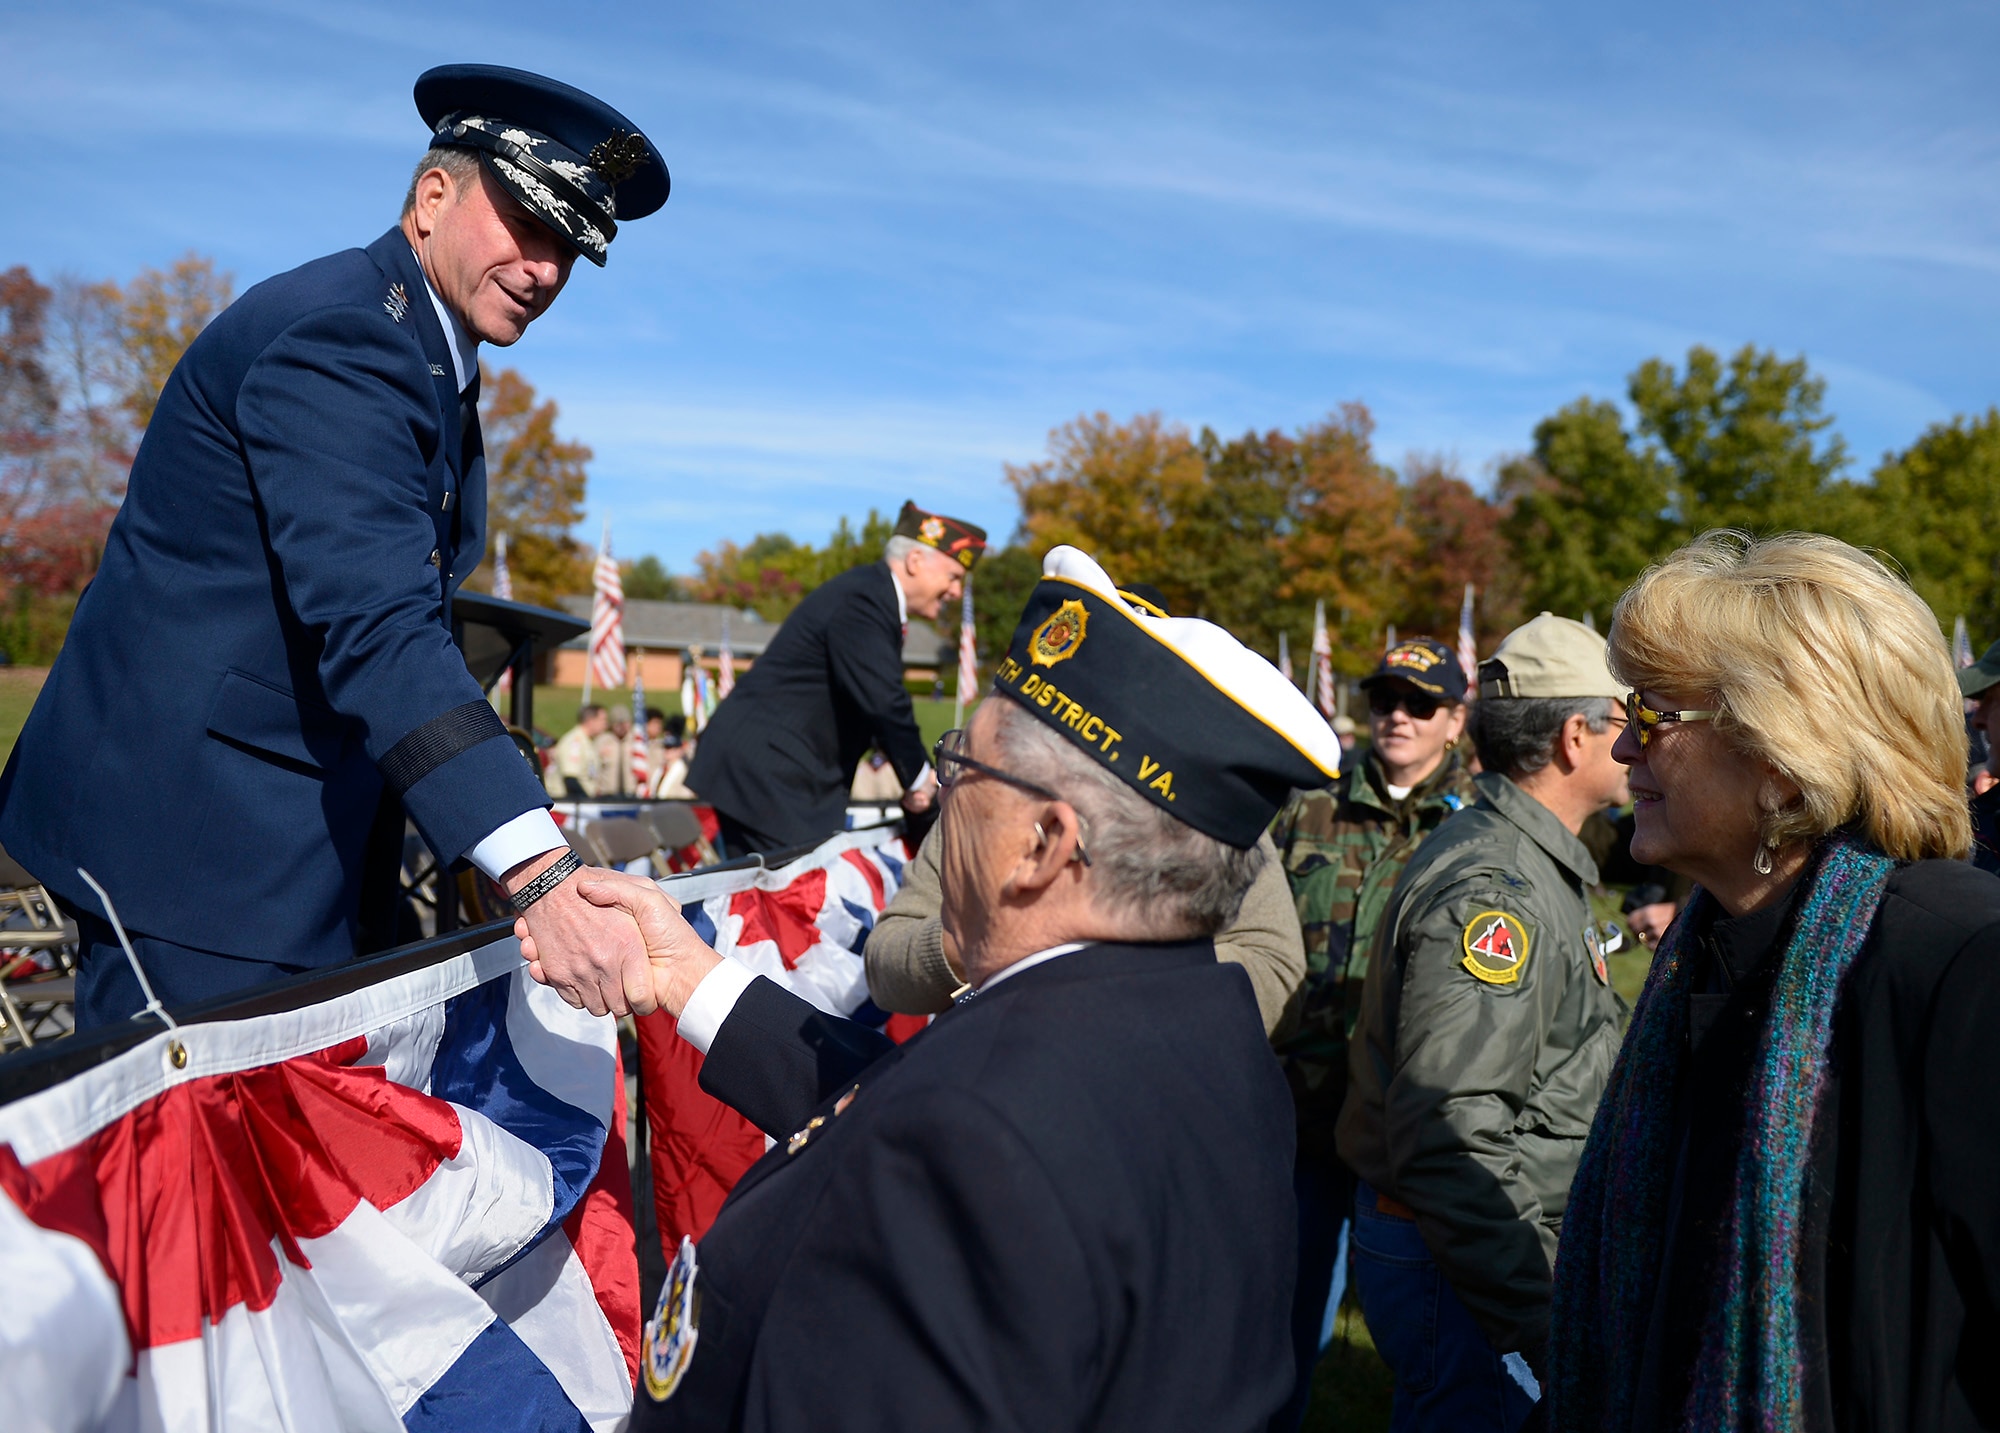 Air Force Chief of Staff Gen. David L. Goldfein shakes hands with veterans who attended this year’s Veterans Day ceremony at Quantico National Cemetery in Quantico, Va., Nov. 11, 2017. The Veterans Day ceremony is an annual event hosted by the Potomac Region Veterans Council. The event featured a performance by the Quantico Marine Corps Band. (U.S. Air Force photo by Tech. Sgt. Dan DeCook)